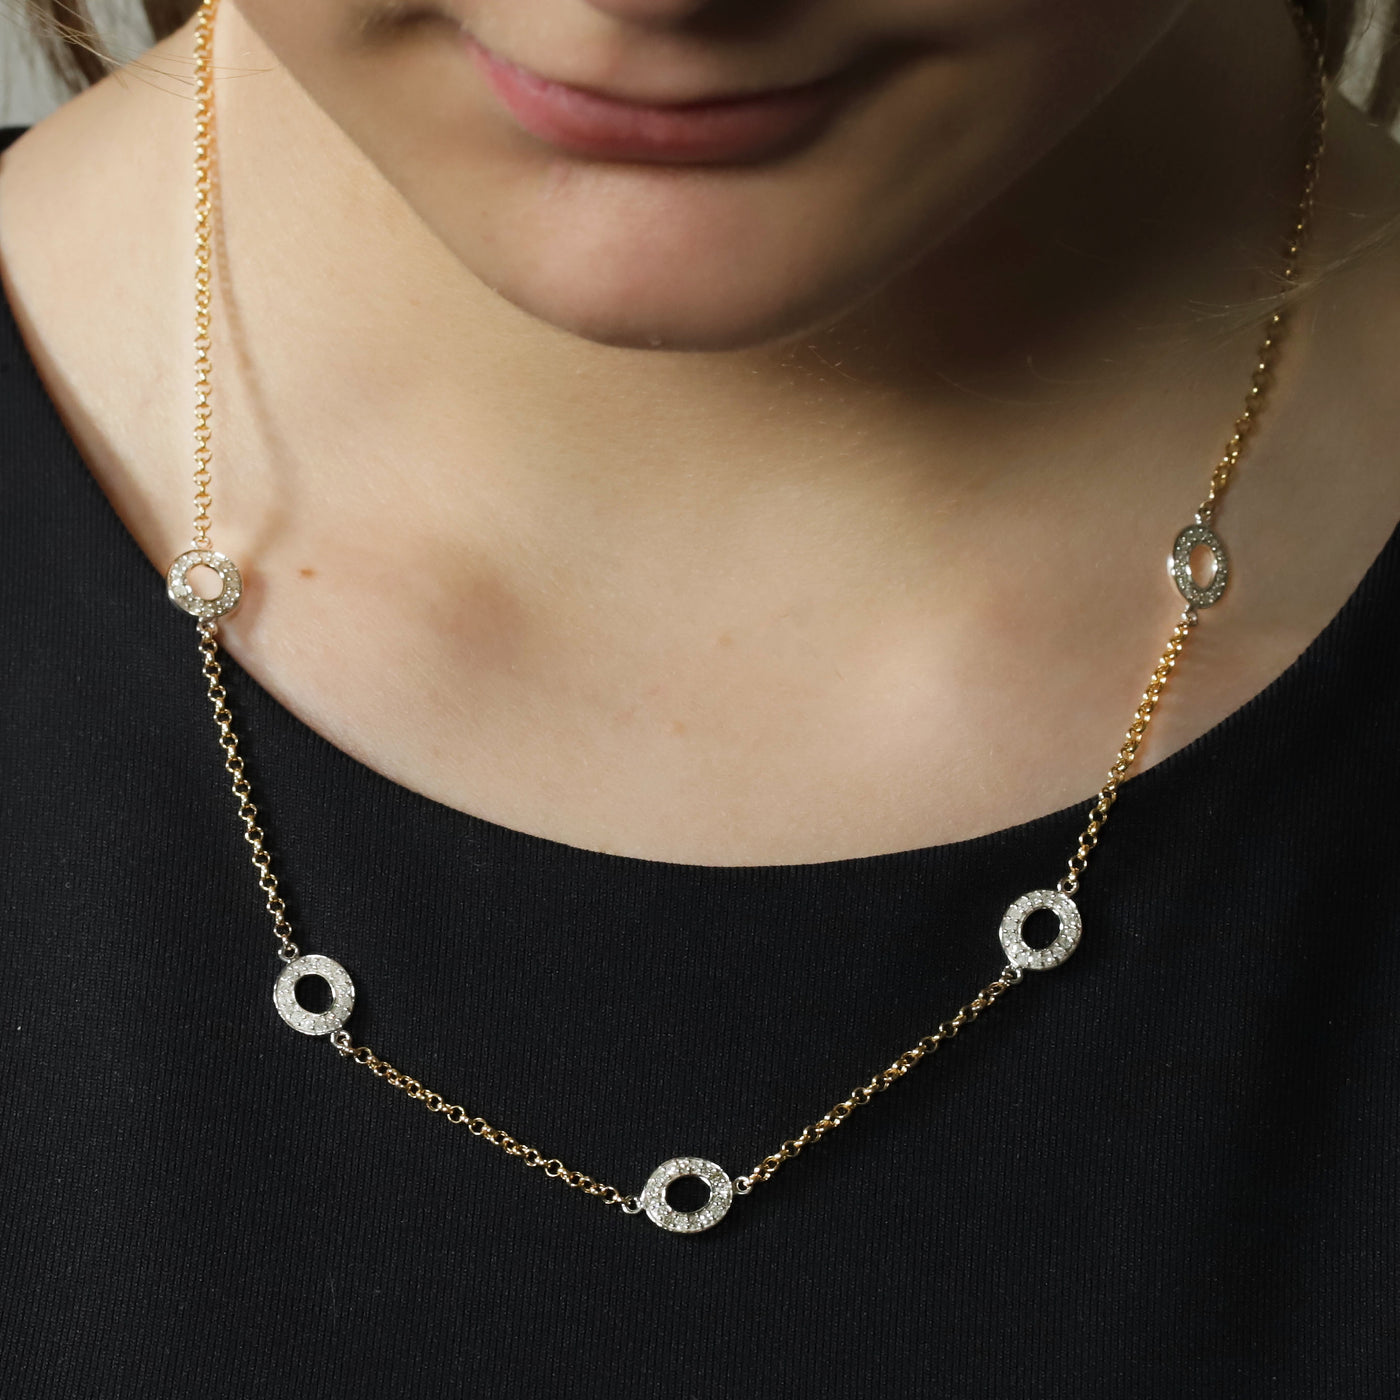 Circles of Diamonds on Station Necklace